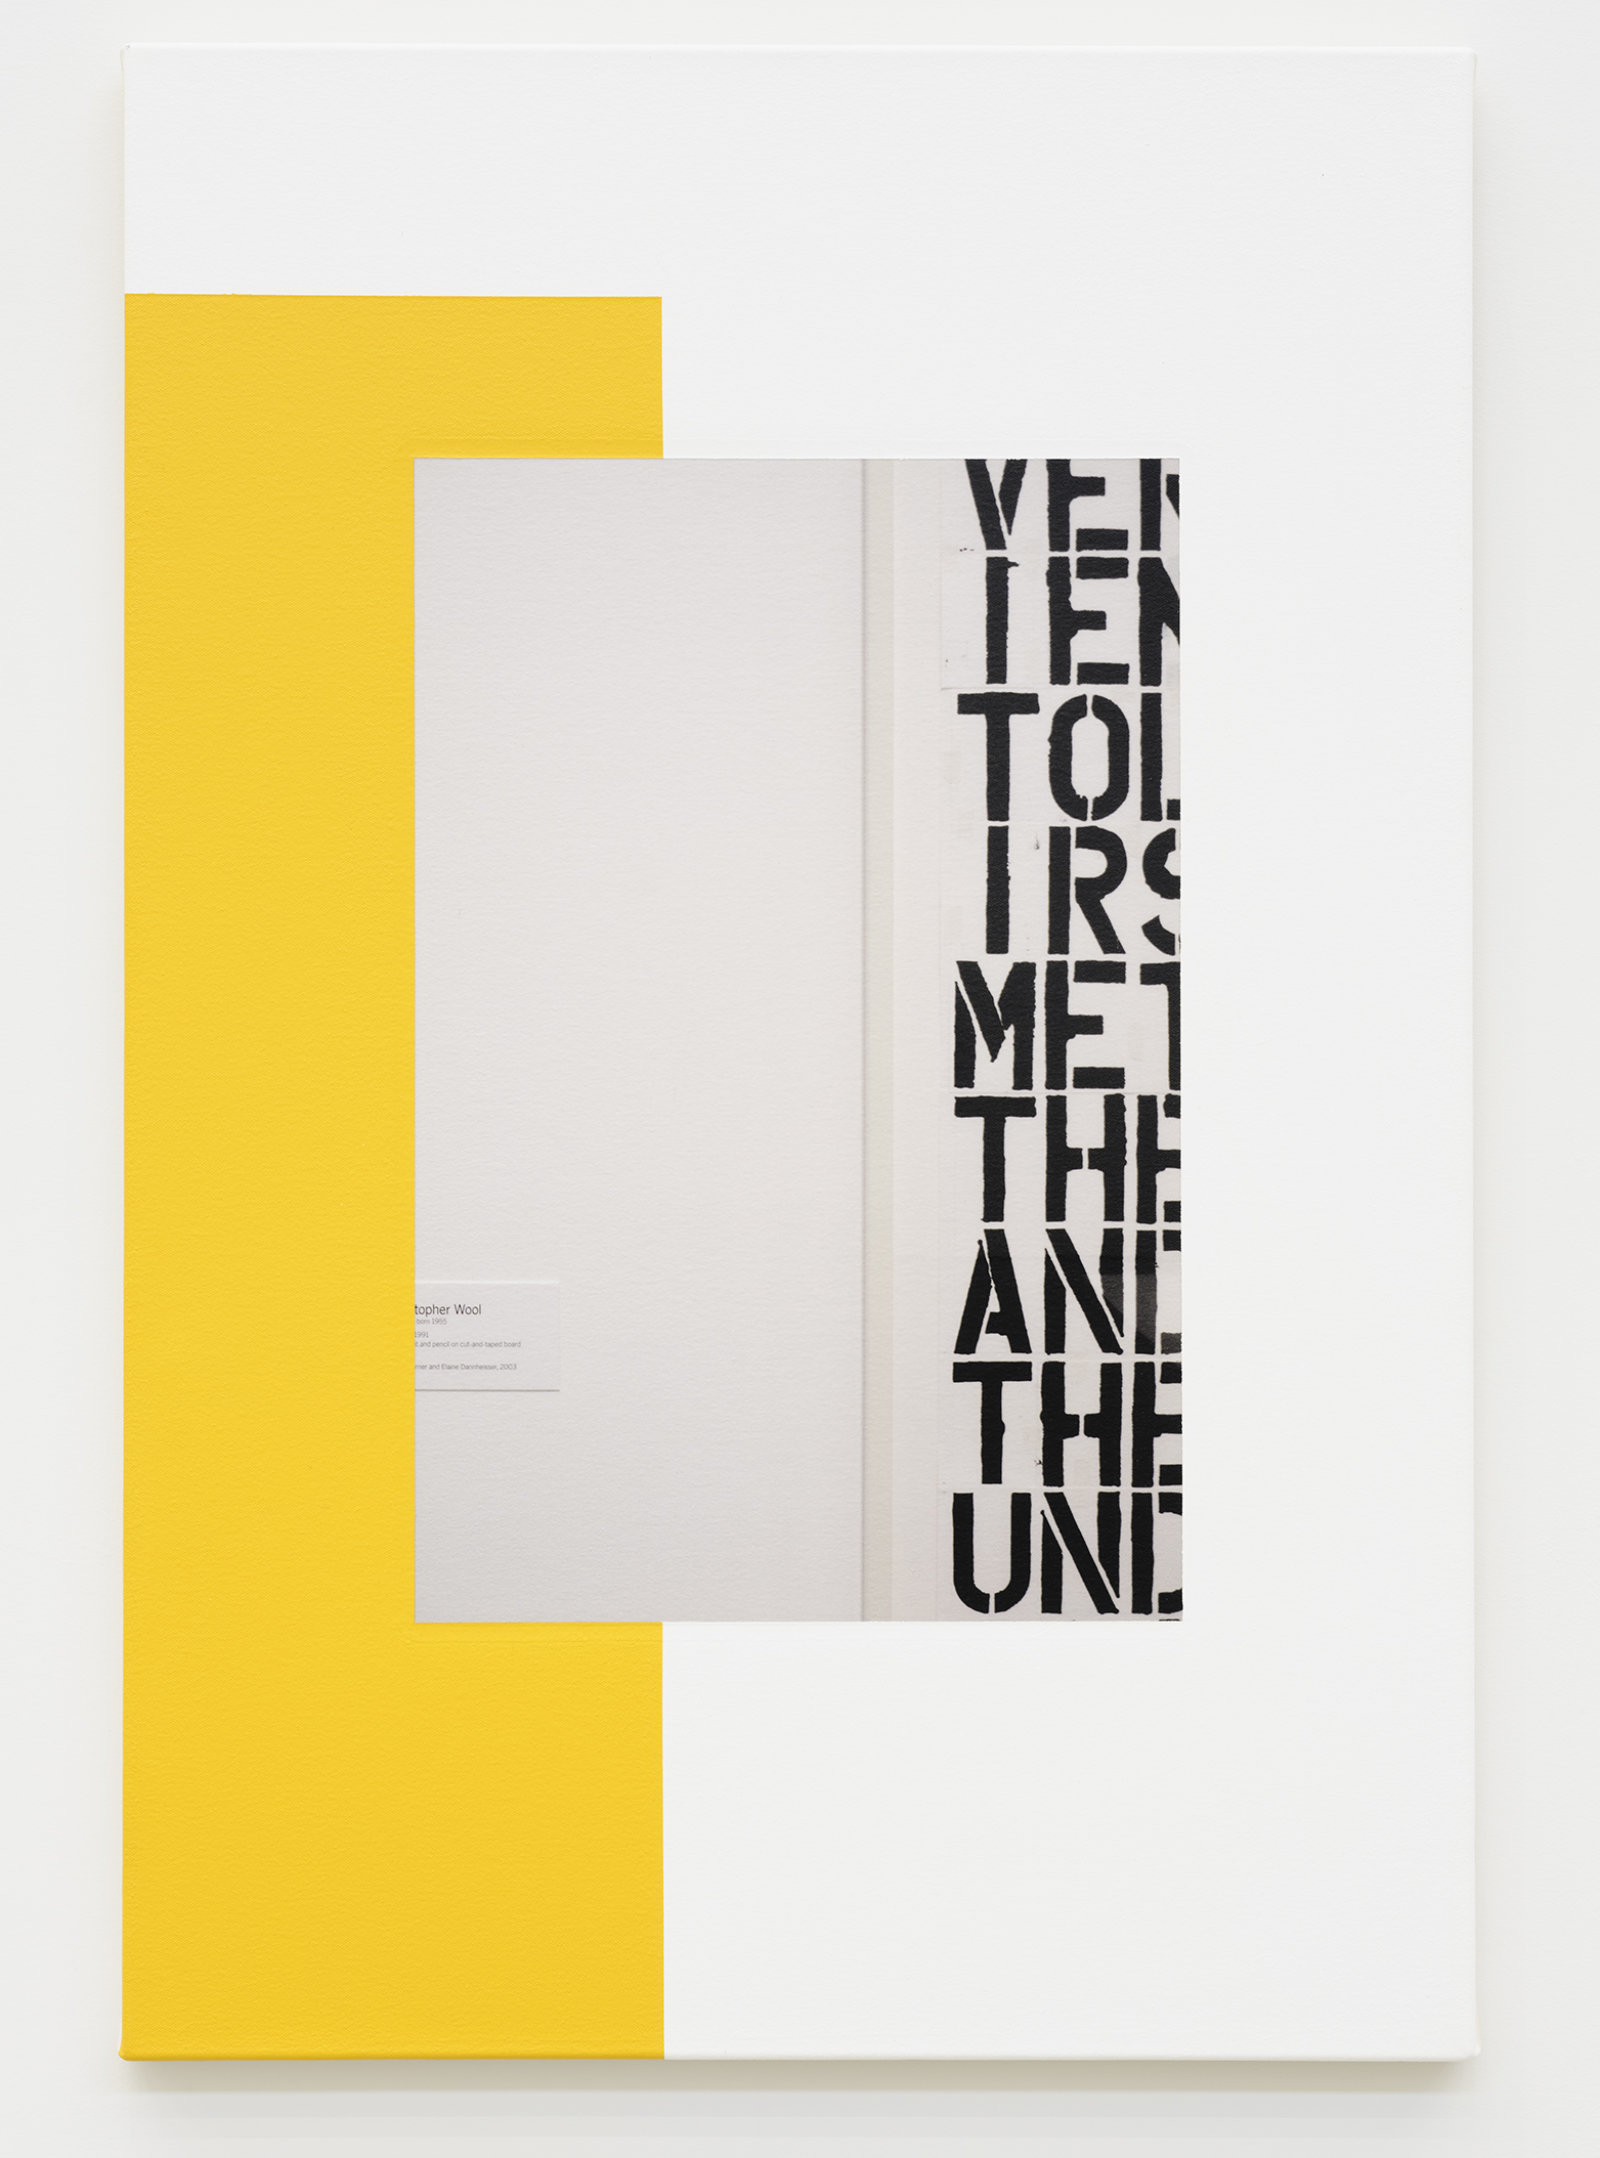 Ian Wallace, Abstract Composition (with Christopher Wool), 2011, photolaminate with acrylic on canvas, 36 x 24 in. (91 x 61 cm)